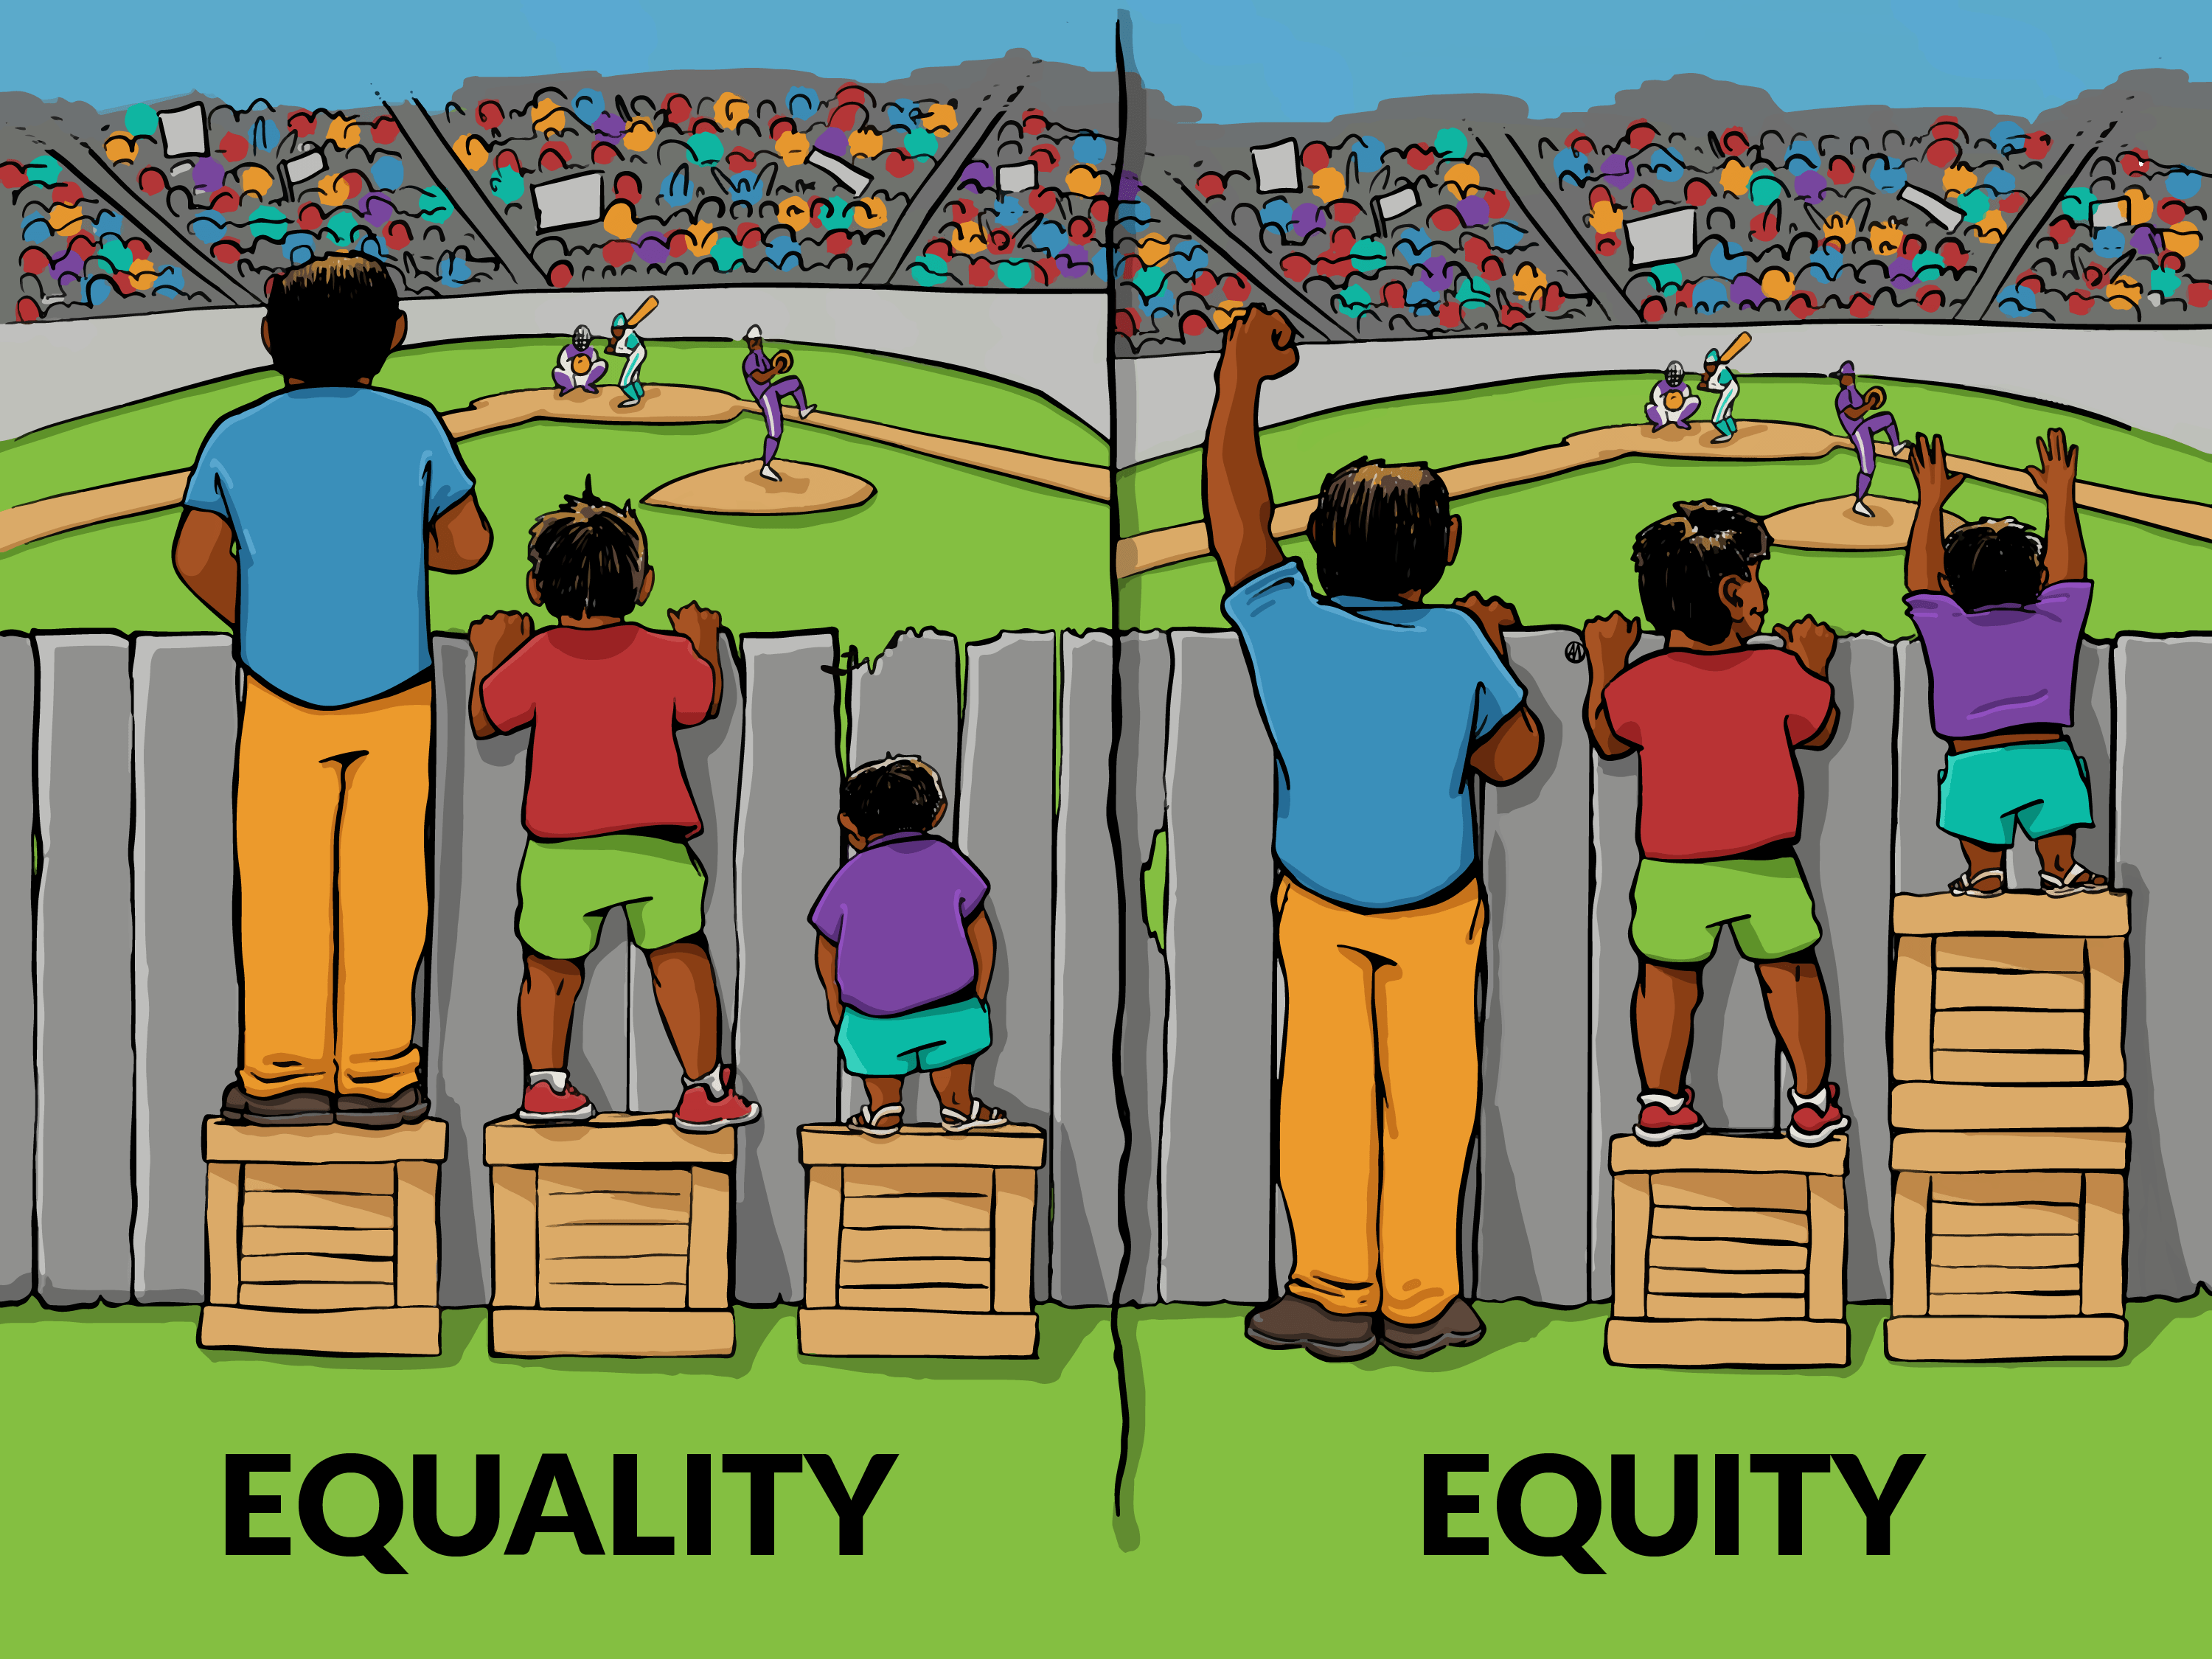 Equality is giving everyone a box, but equity is giving everyone exactly what they need to see the game. (Image credit: Interaction Institute for Social Change, illustrated by Angus Maguire